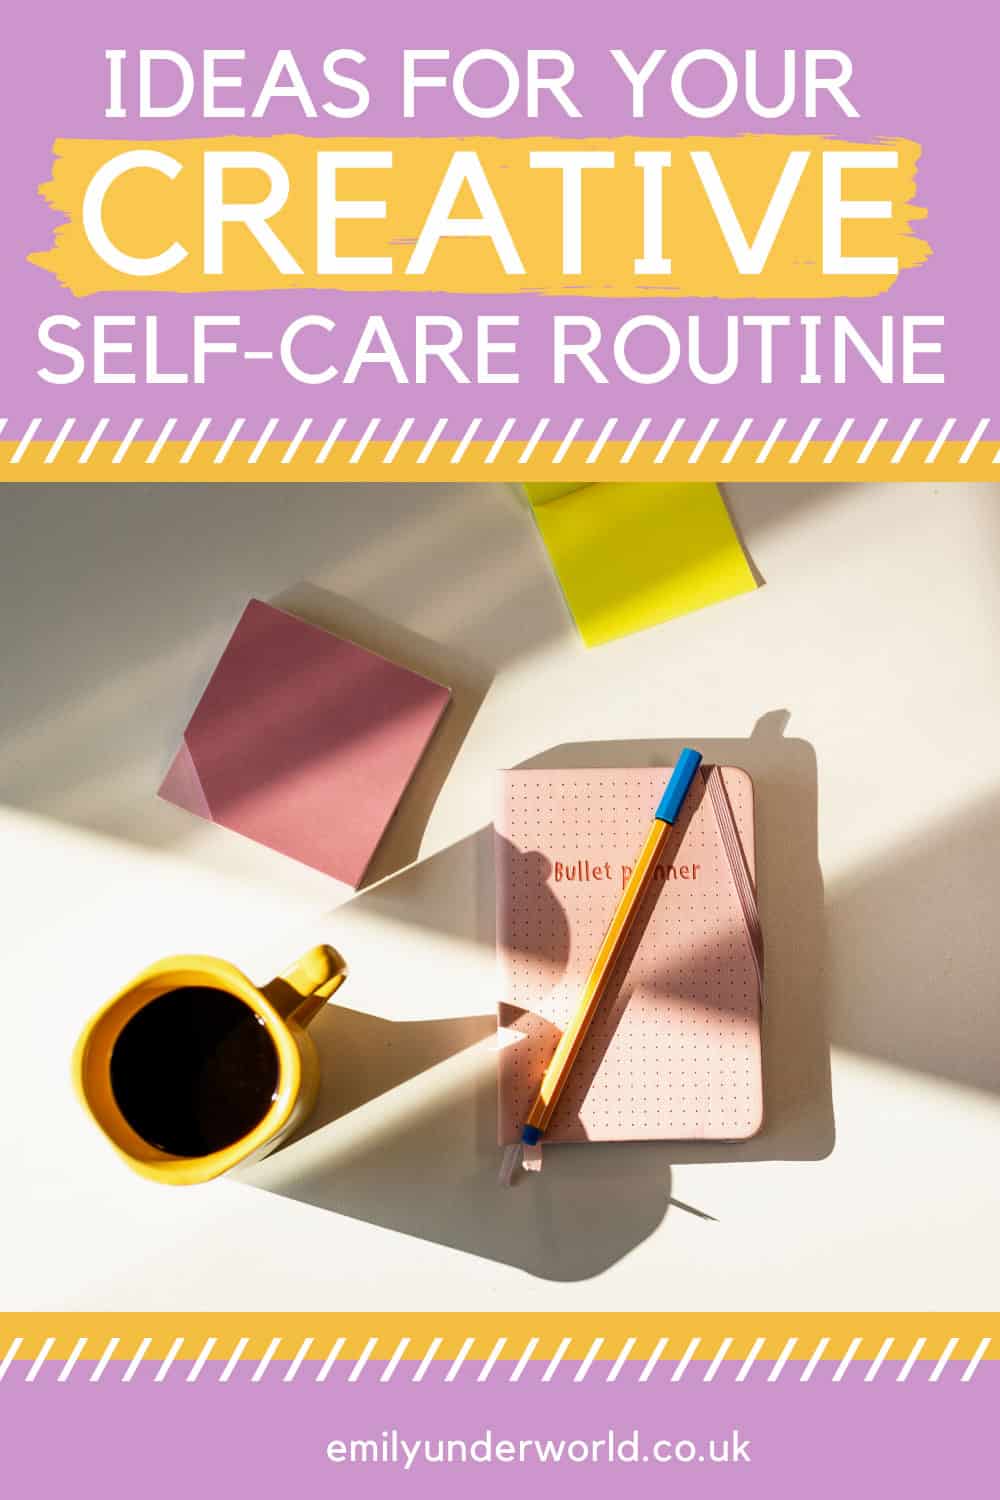 8 Ideas For Your Creative Self-Care Routine